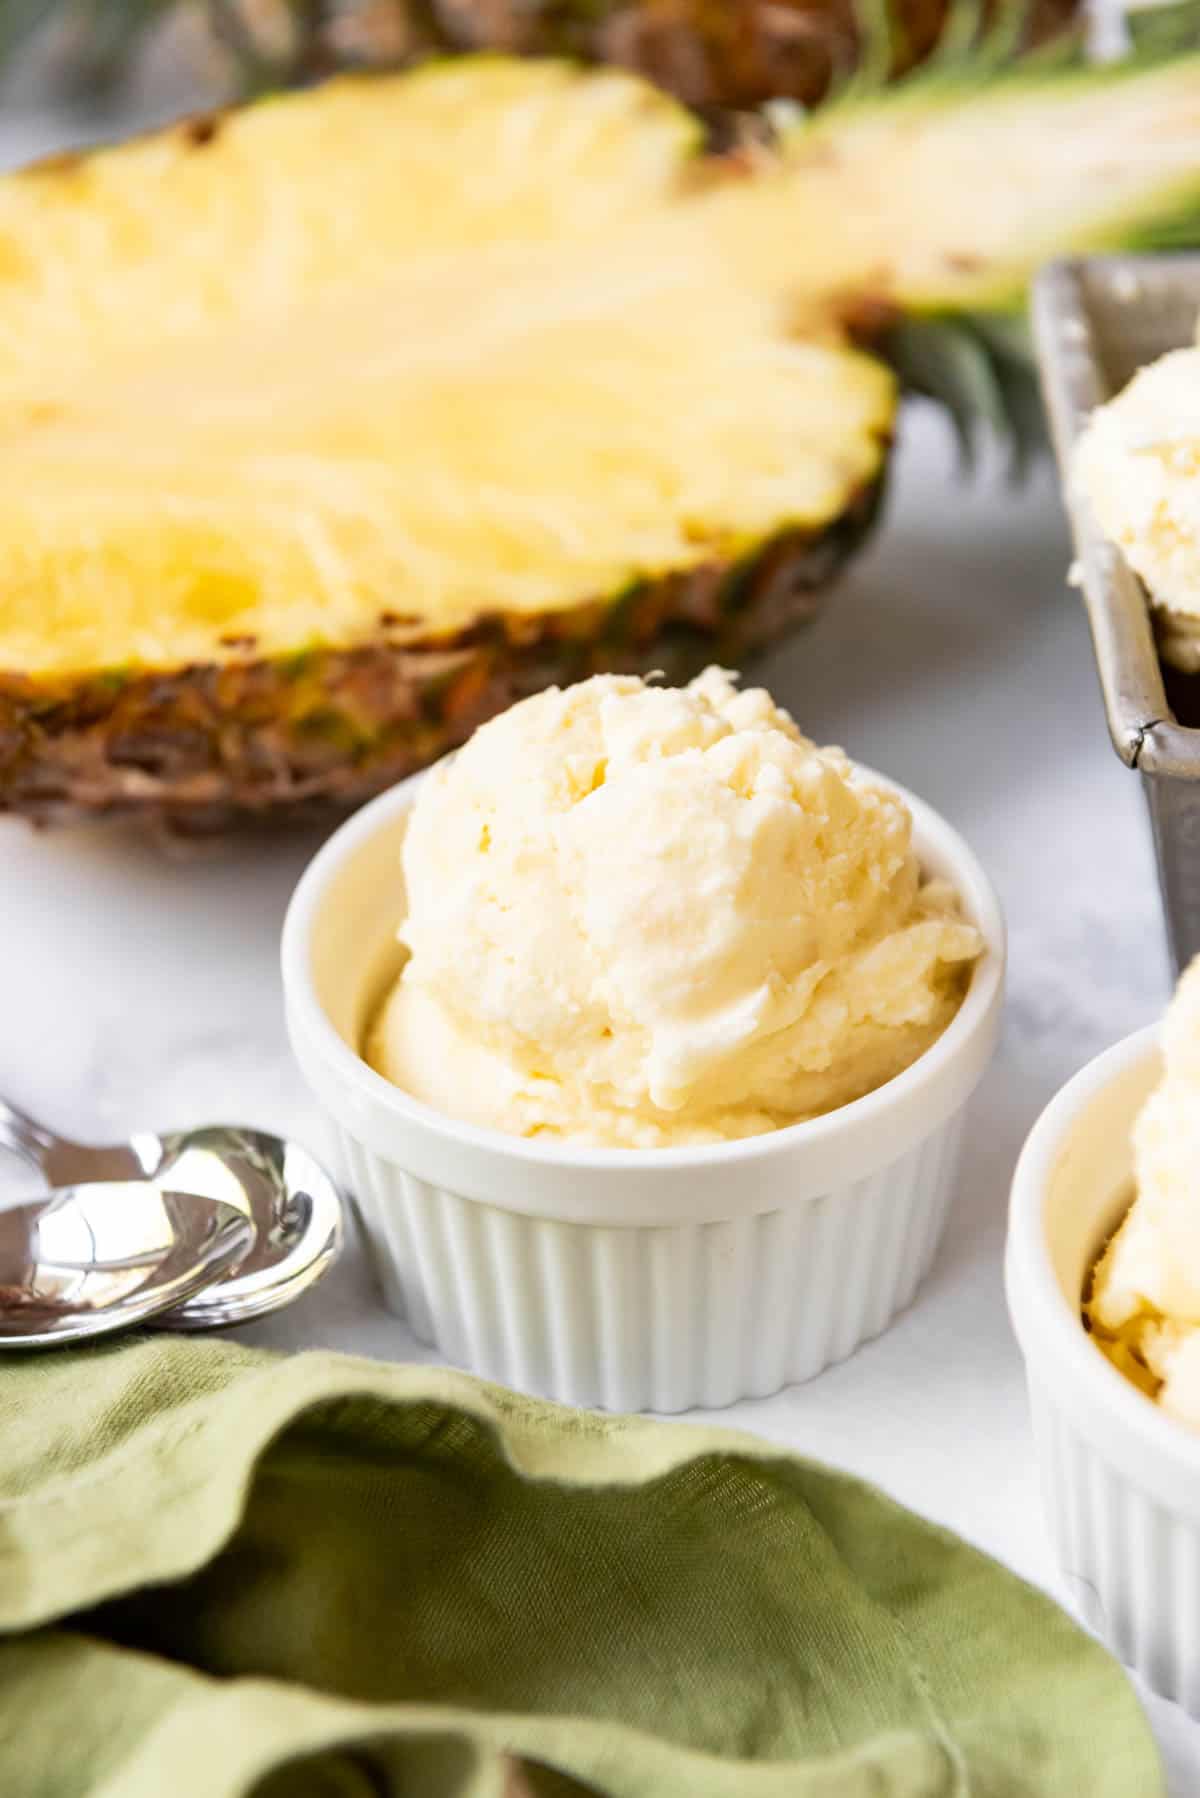 A close up image of a scoop of pineapple ice cream in a bowl.